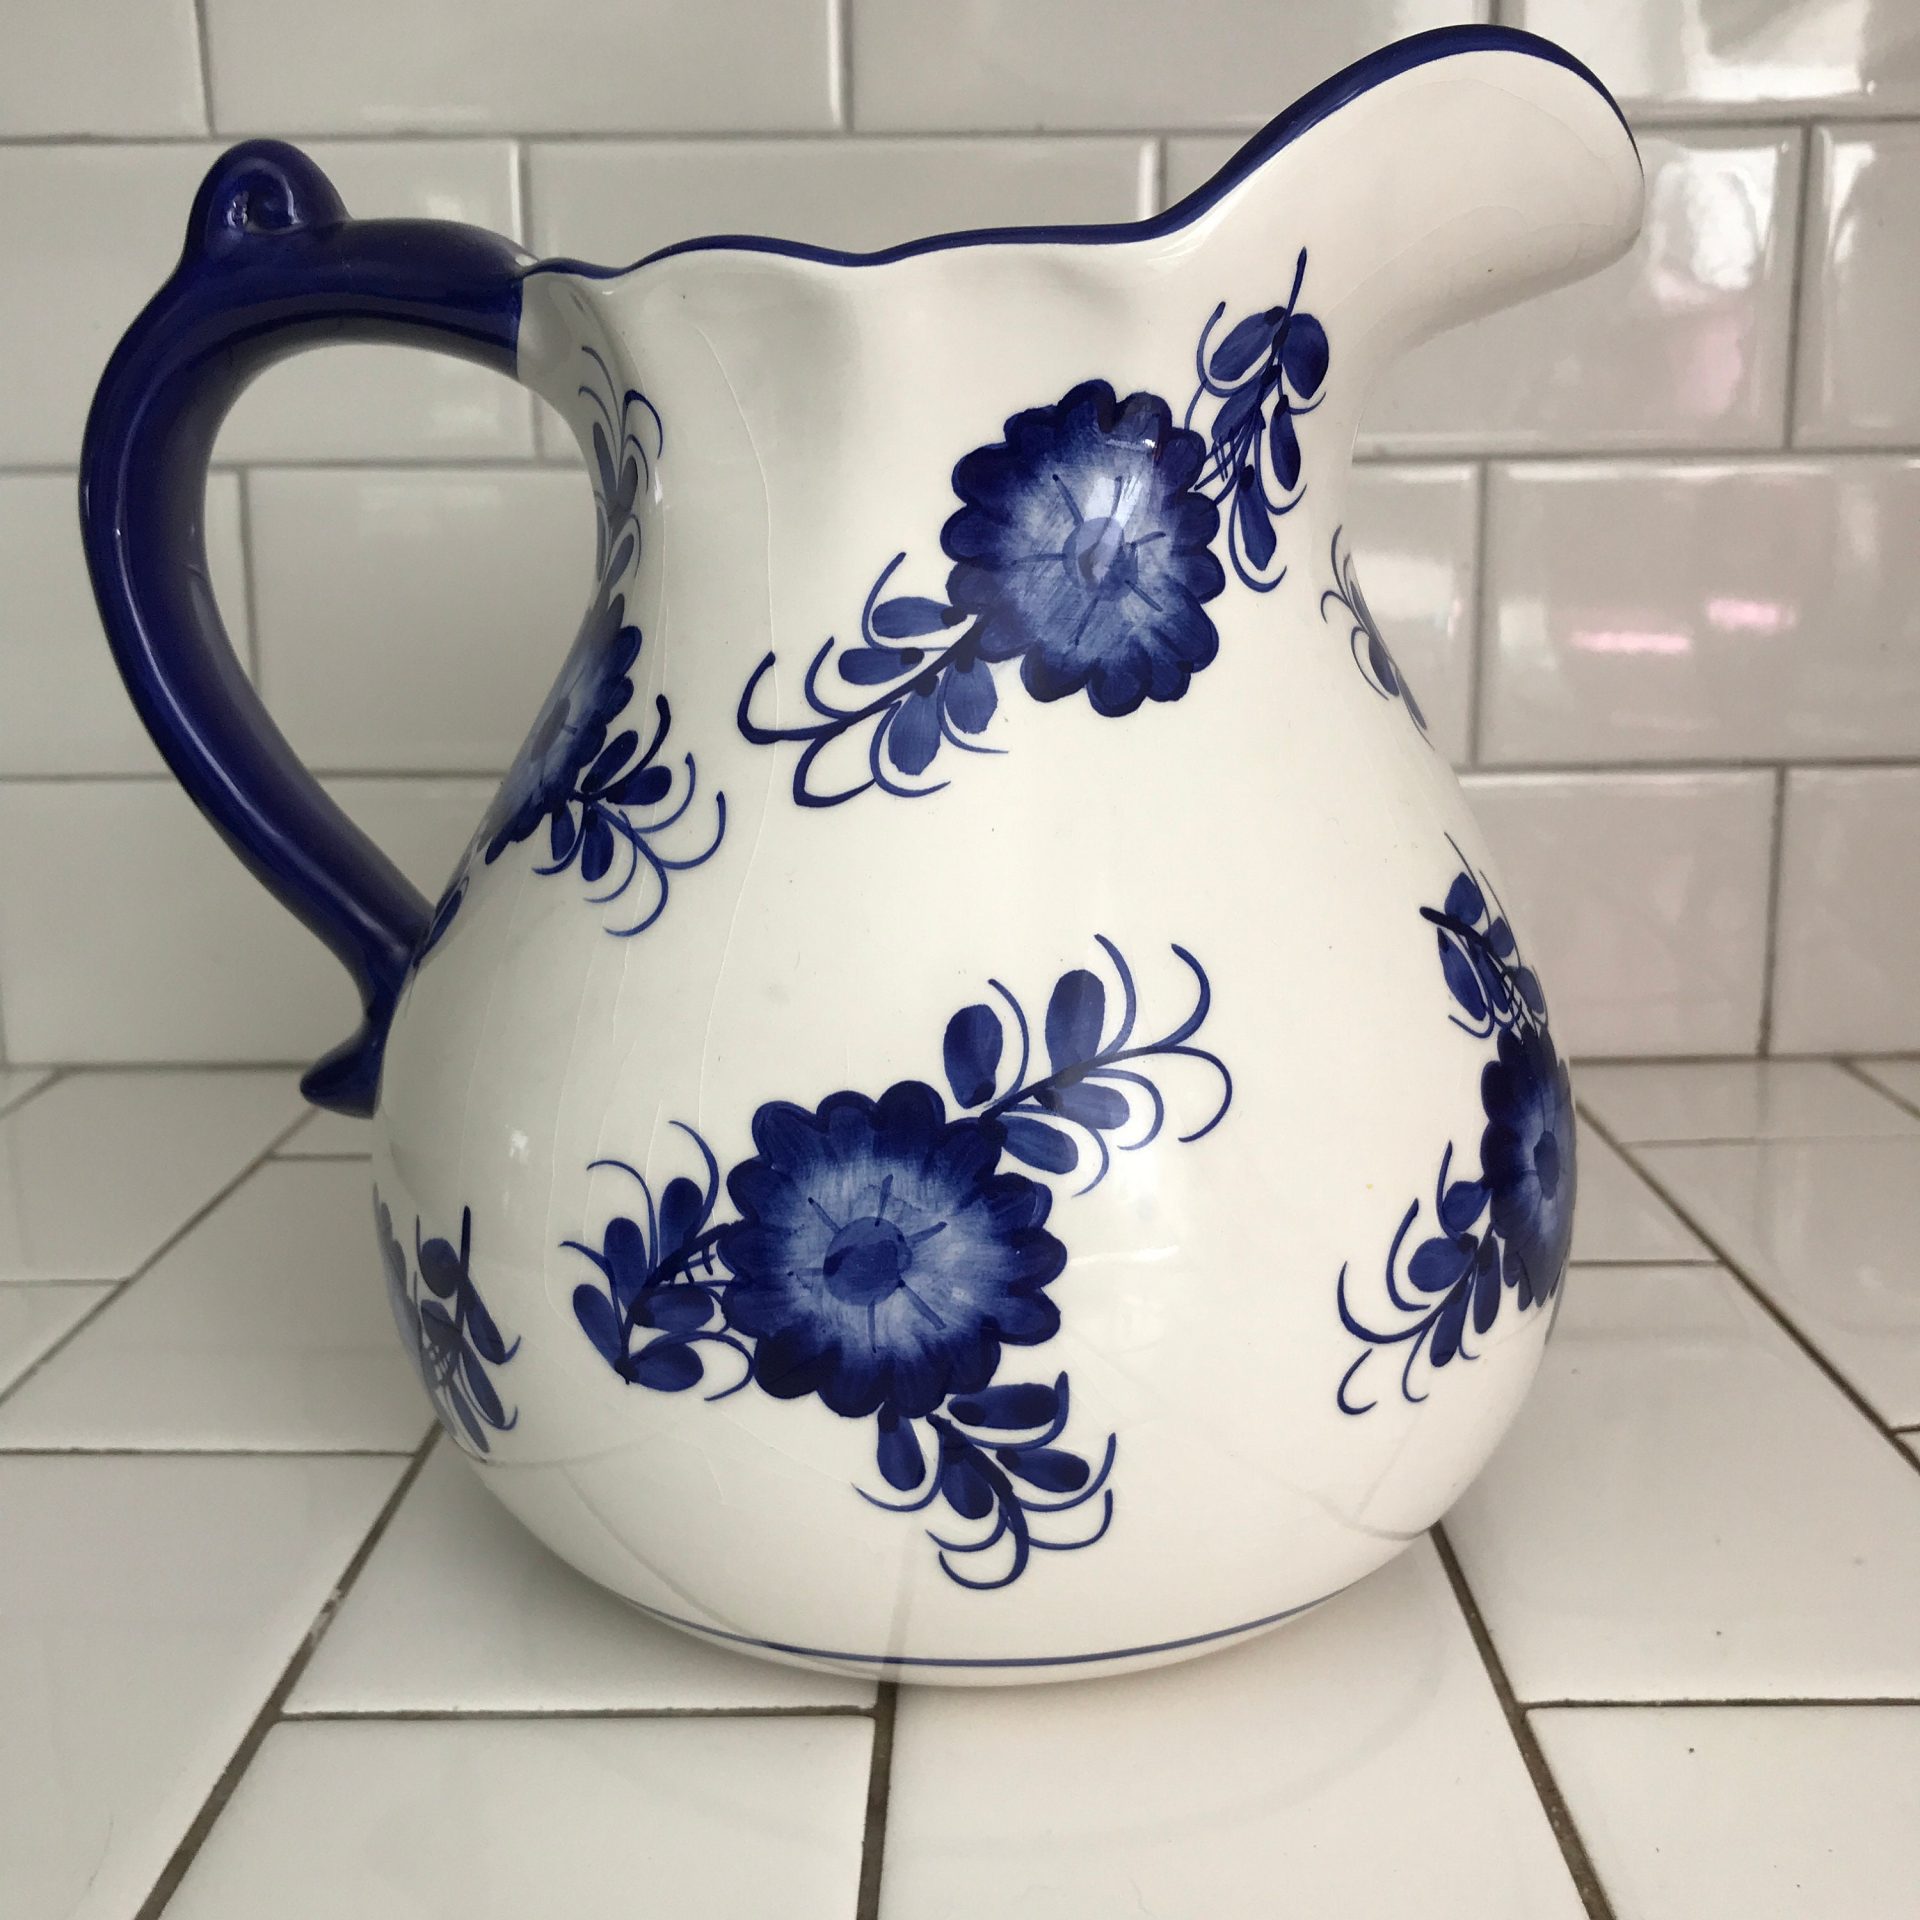 Vintage Ceramic Creamer or Tea Pitcher - 12 ounce Small Ceramic Pitcher  with Lid - Blue and White floral design - Unique Gift Idea